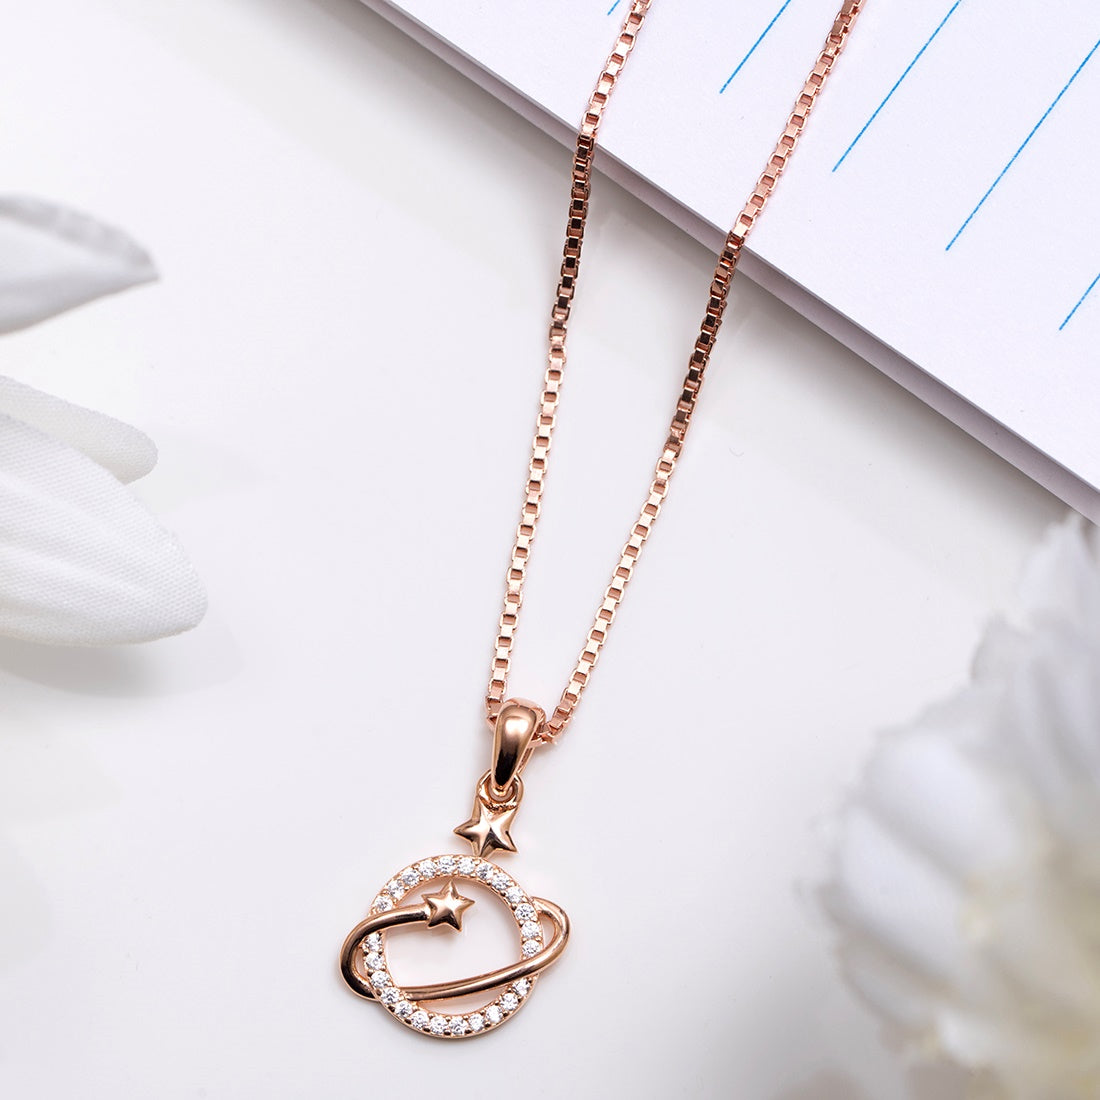 Starry Elegance Rose Gold Plated 925 Sterling Silver Pendant